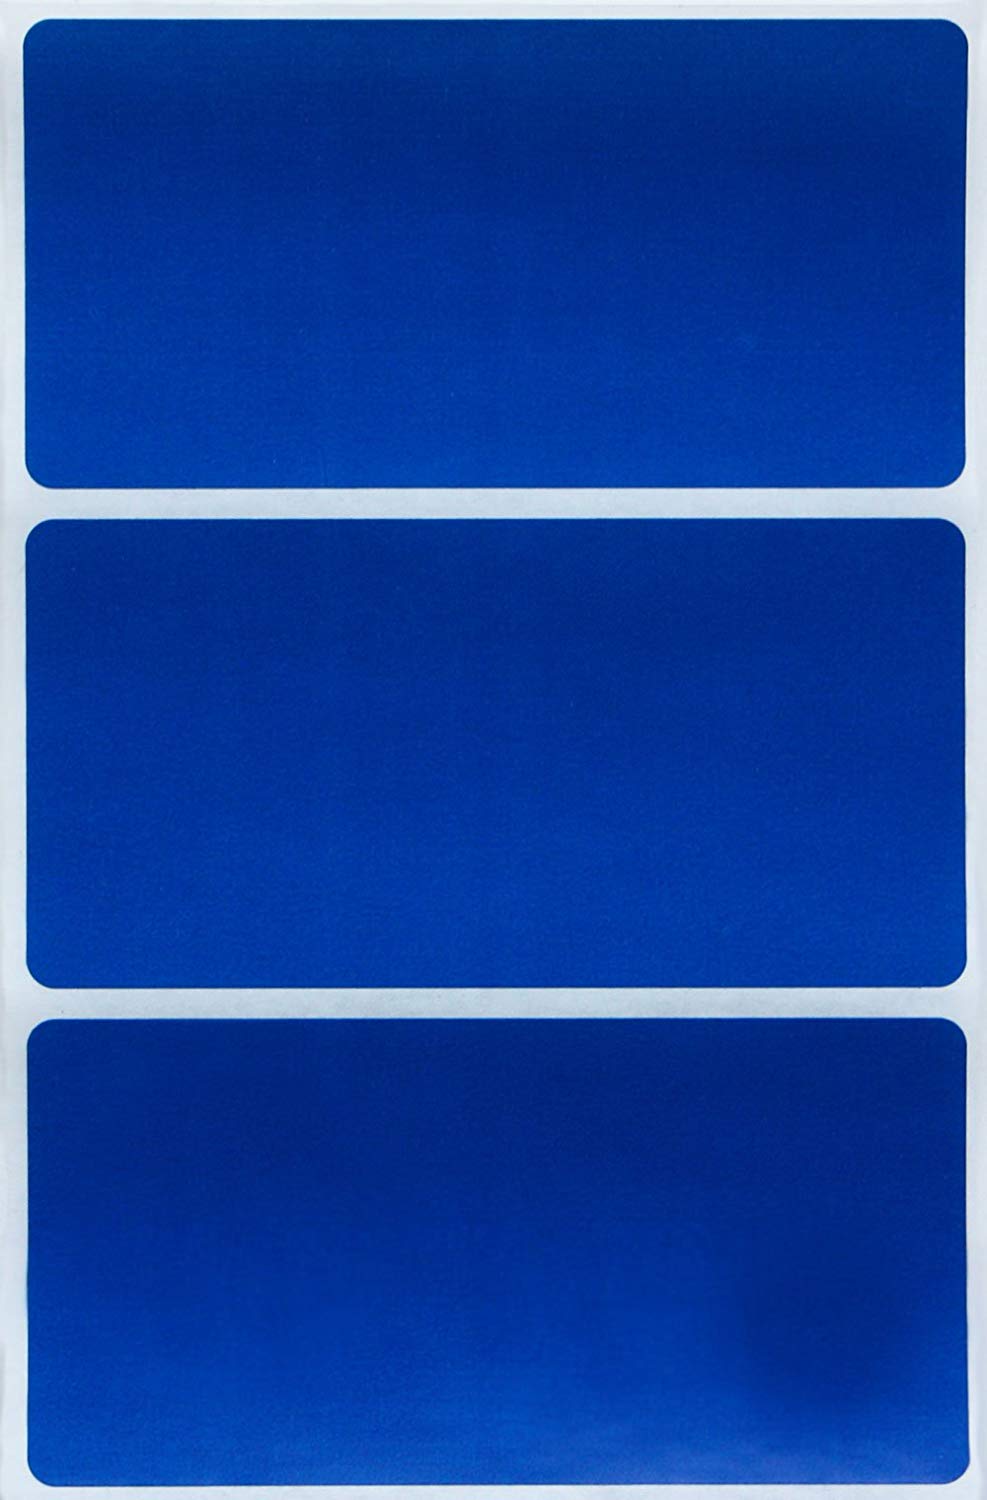 Rectangular stickers 4 x 2 inch classic colors 102mm x 51mm – Royal ...